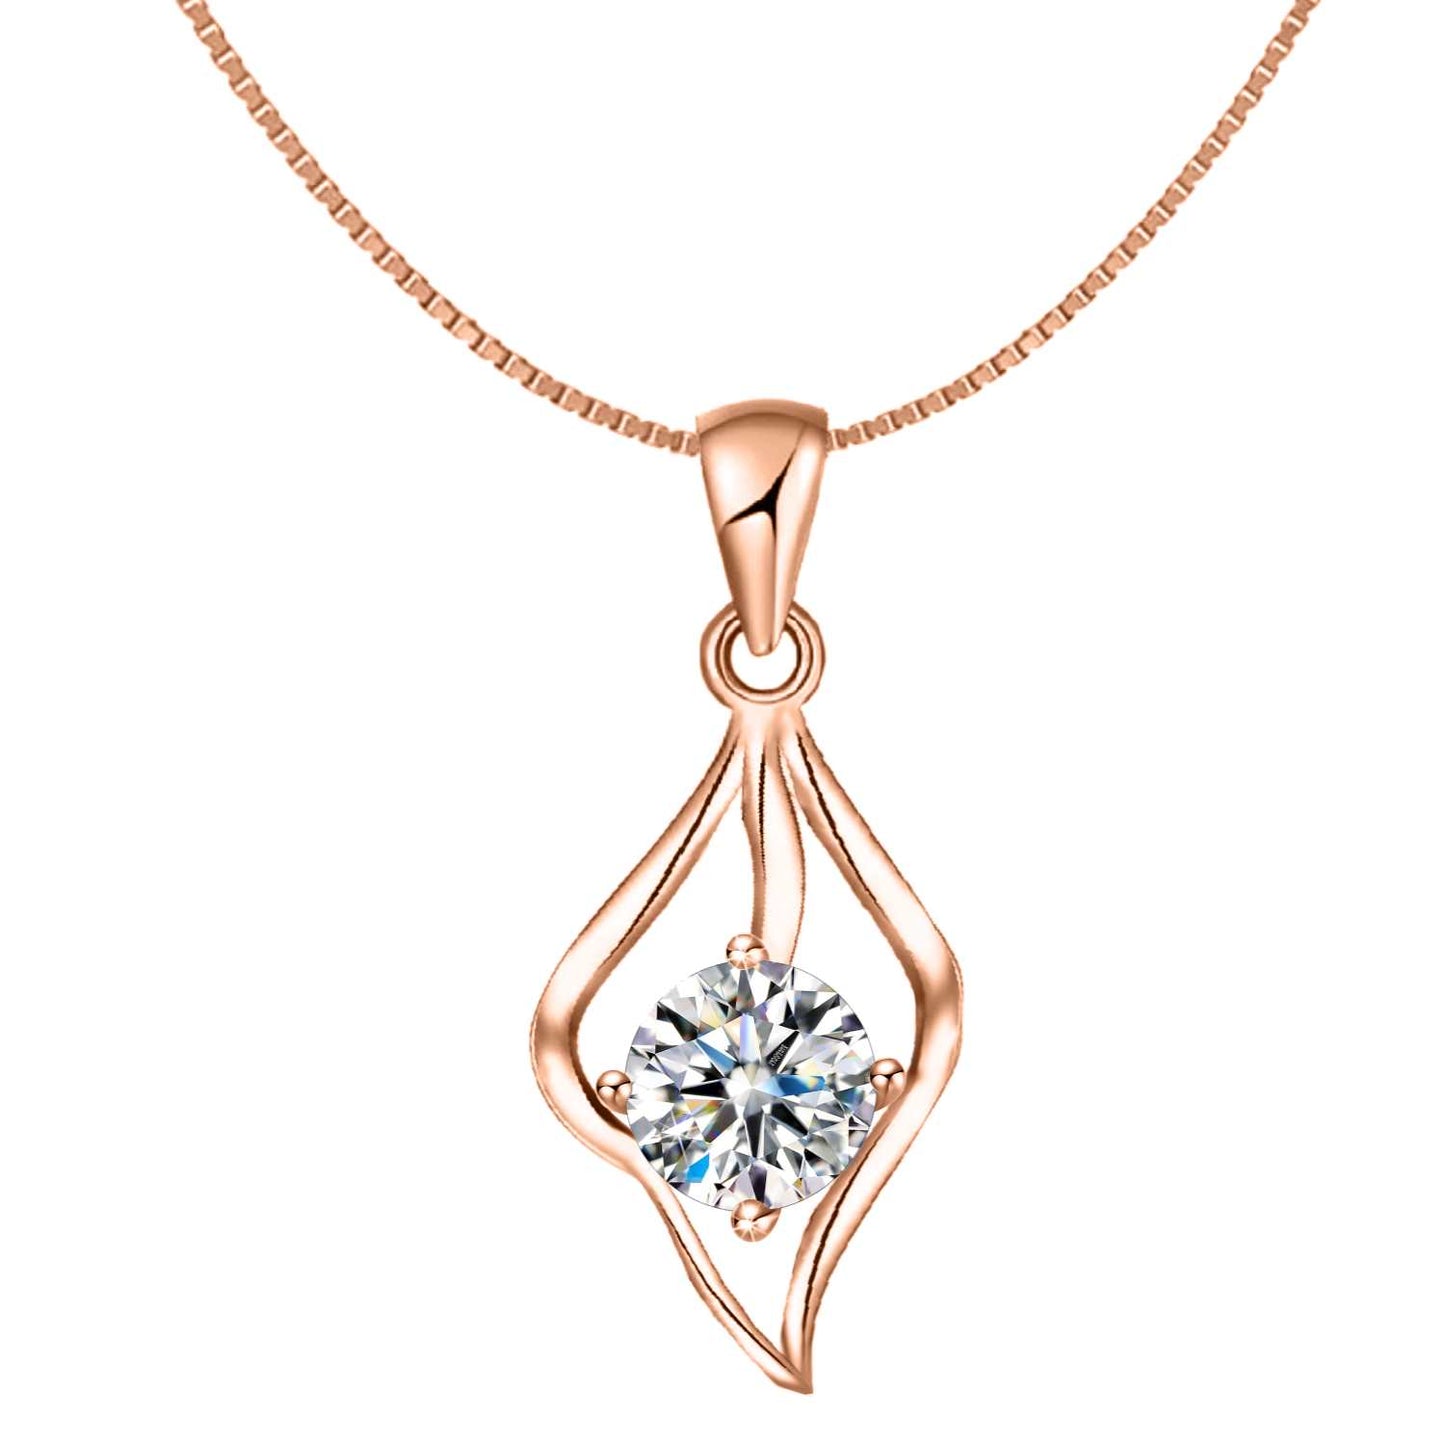 Dew Drop Solitaire Pendant in 92.5 Sterling Silver - 18k Rose Gold finish